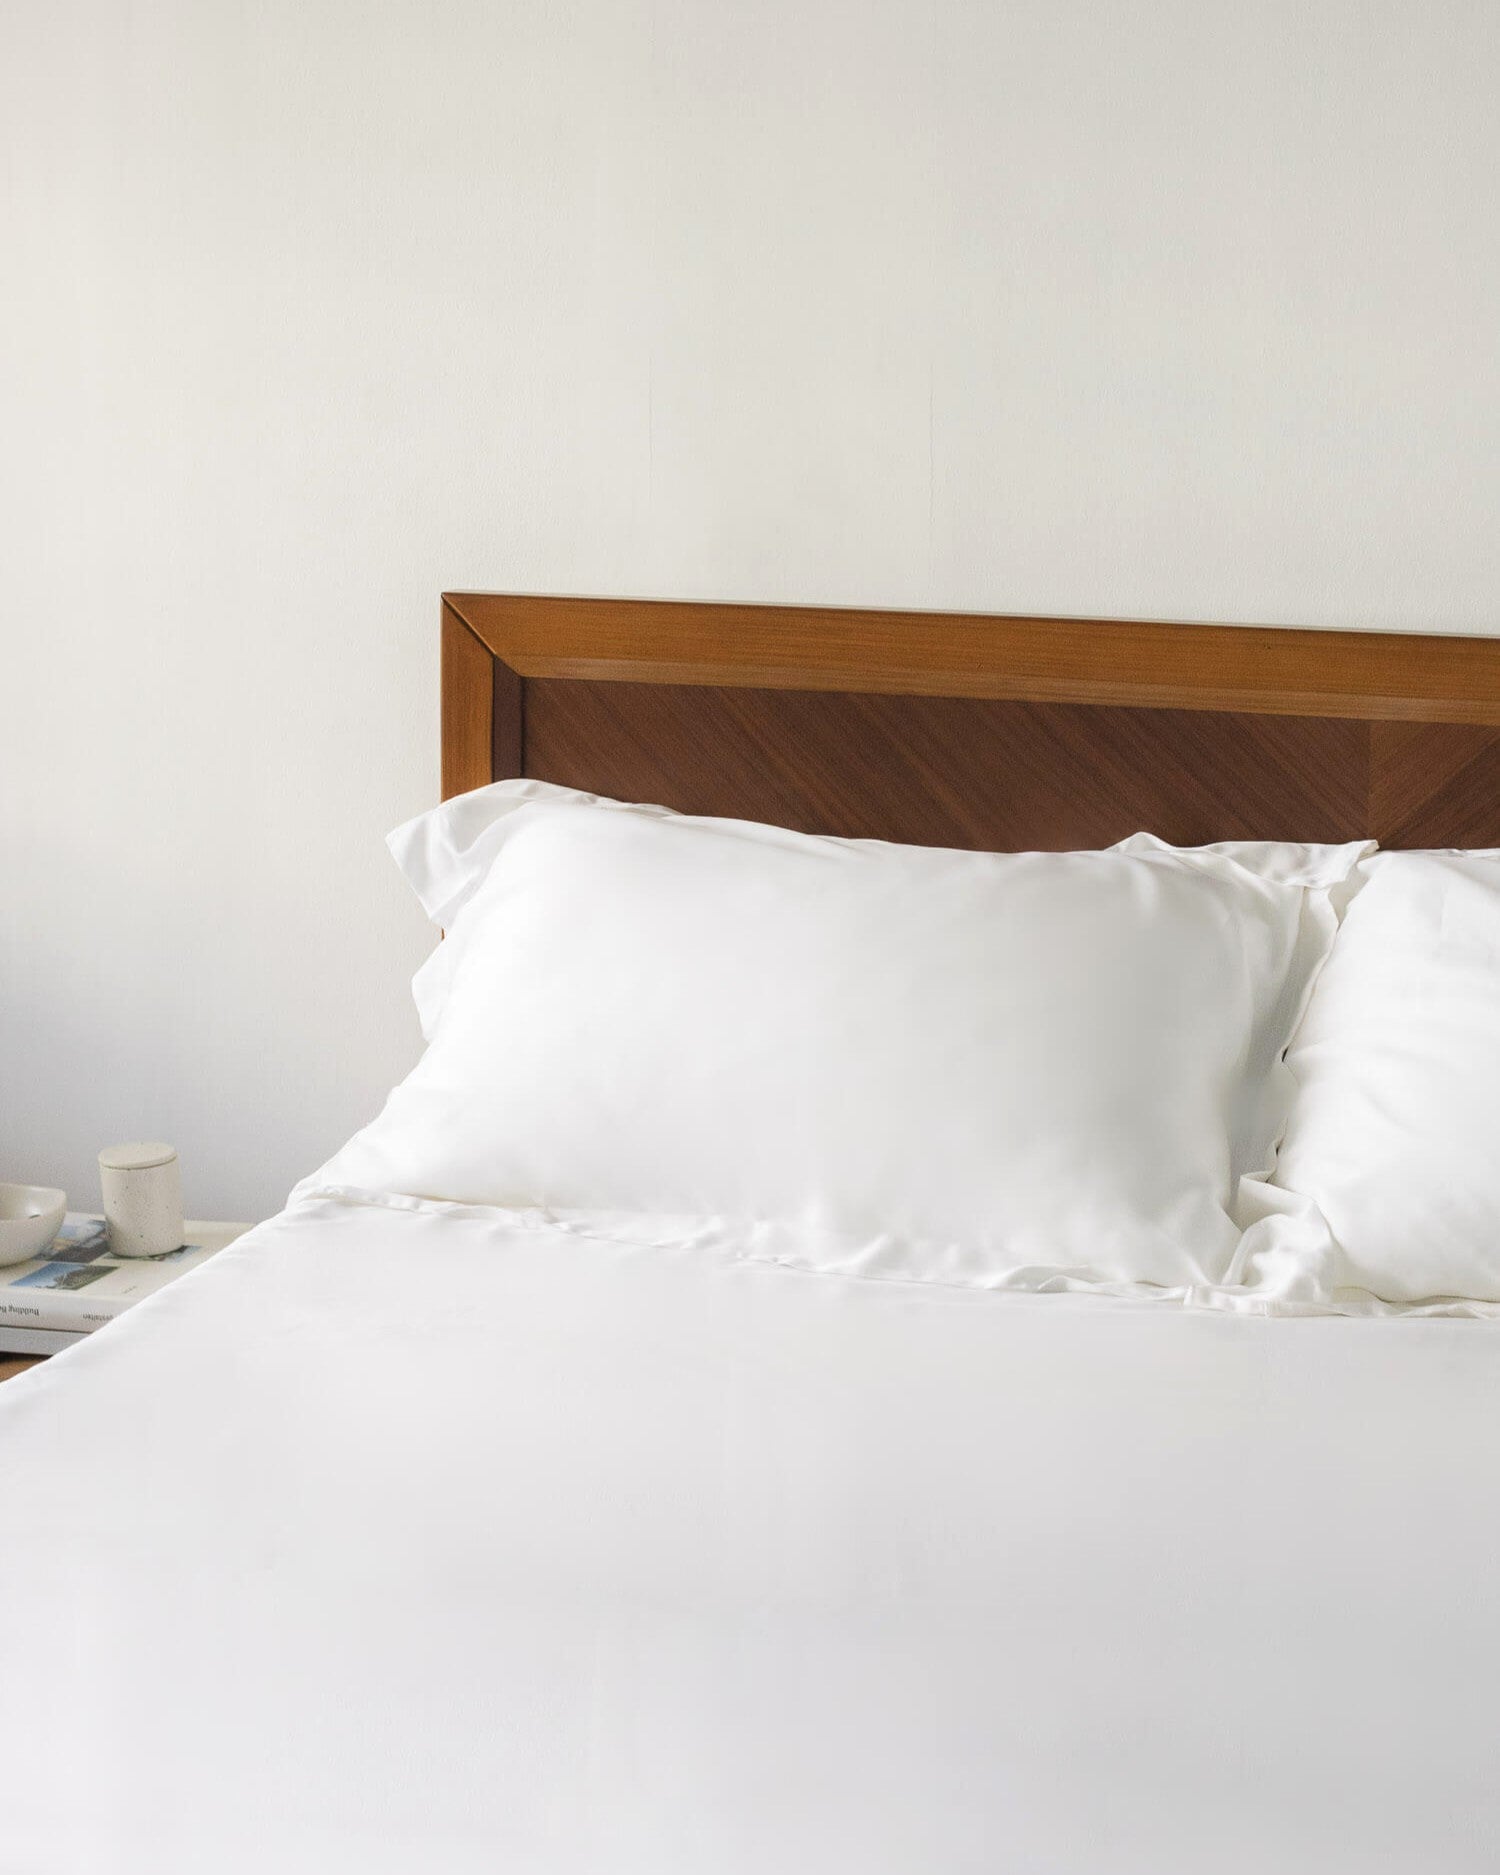 ava and ava ph silky soft organic bamboo lyocell shams / oxford pillowcases in white, classic style pillowcases